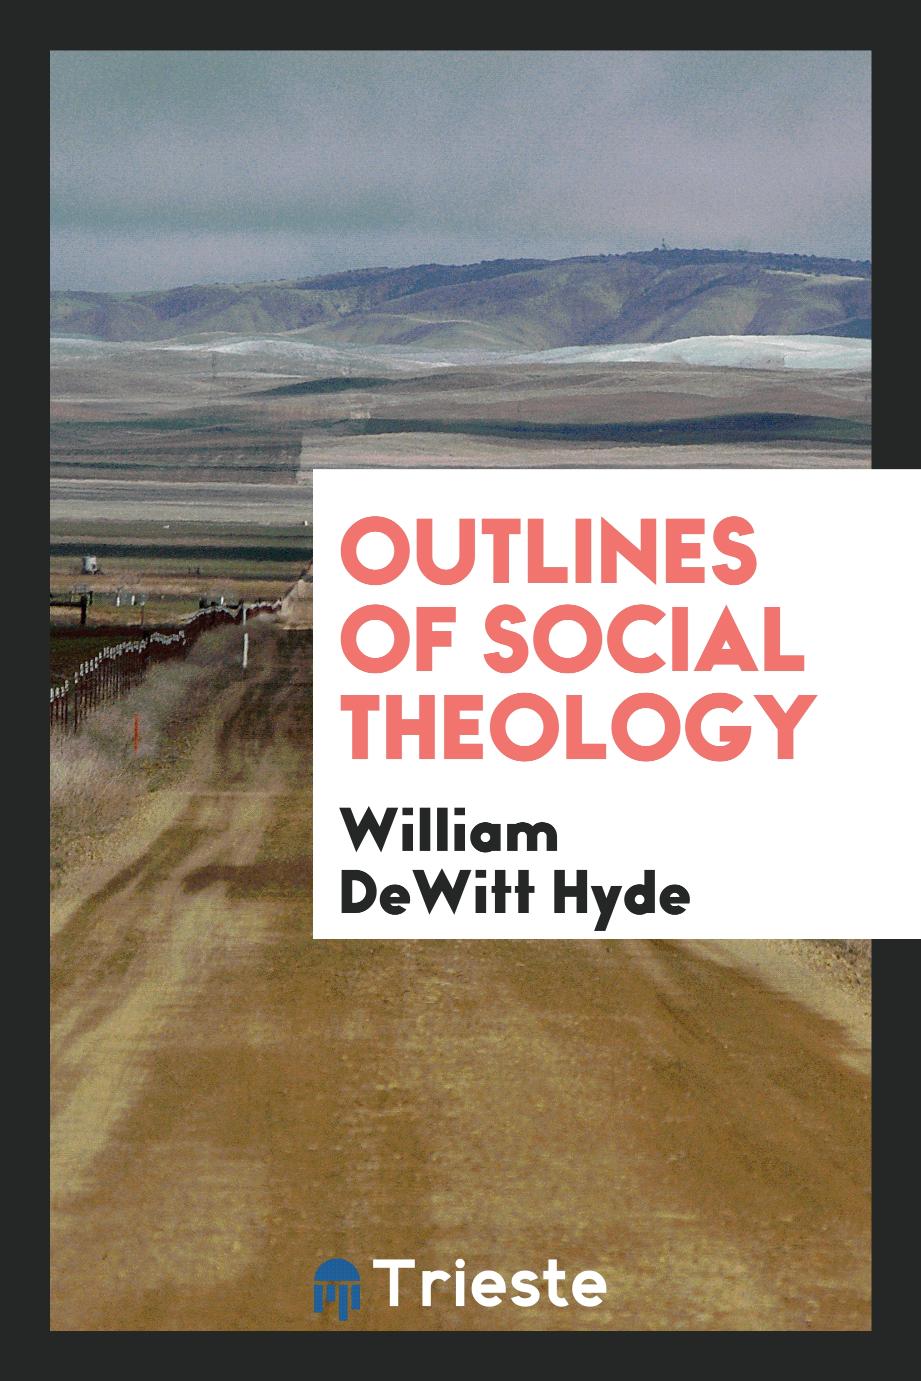 Outlines of social theology